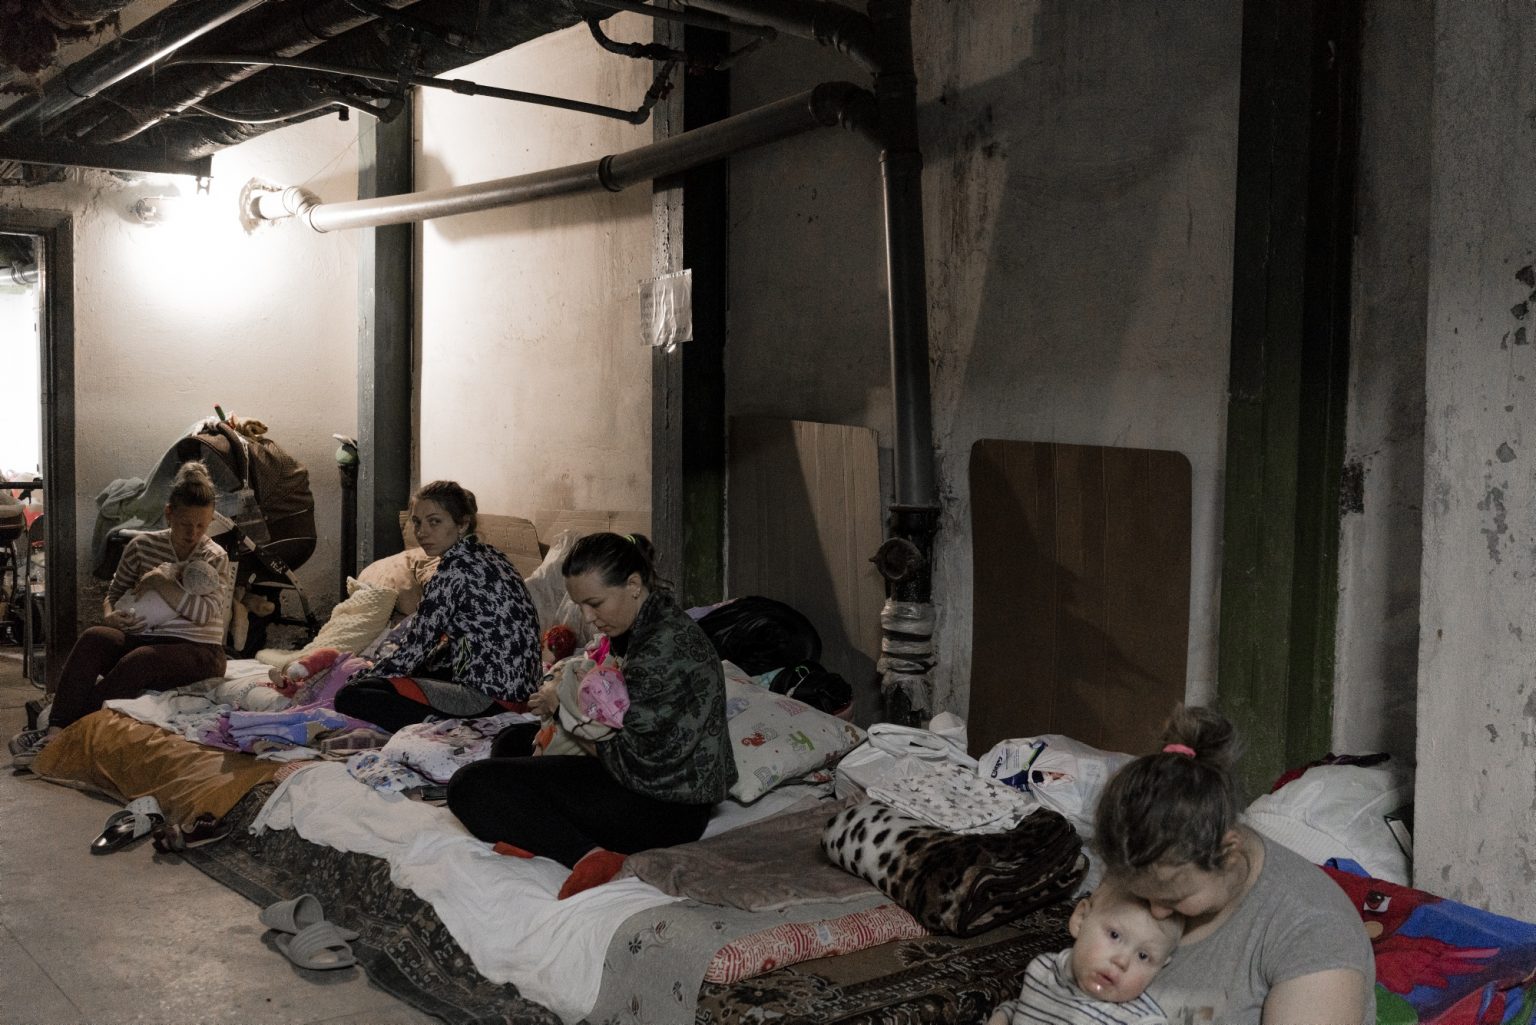 UKRAINE, Kyiv. February 28, 2022 - Women with little kids inside a basement used as a bomb shelter at the Okhmadet children's hospital in central Kyiv.